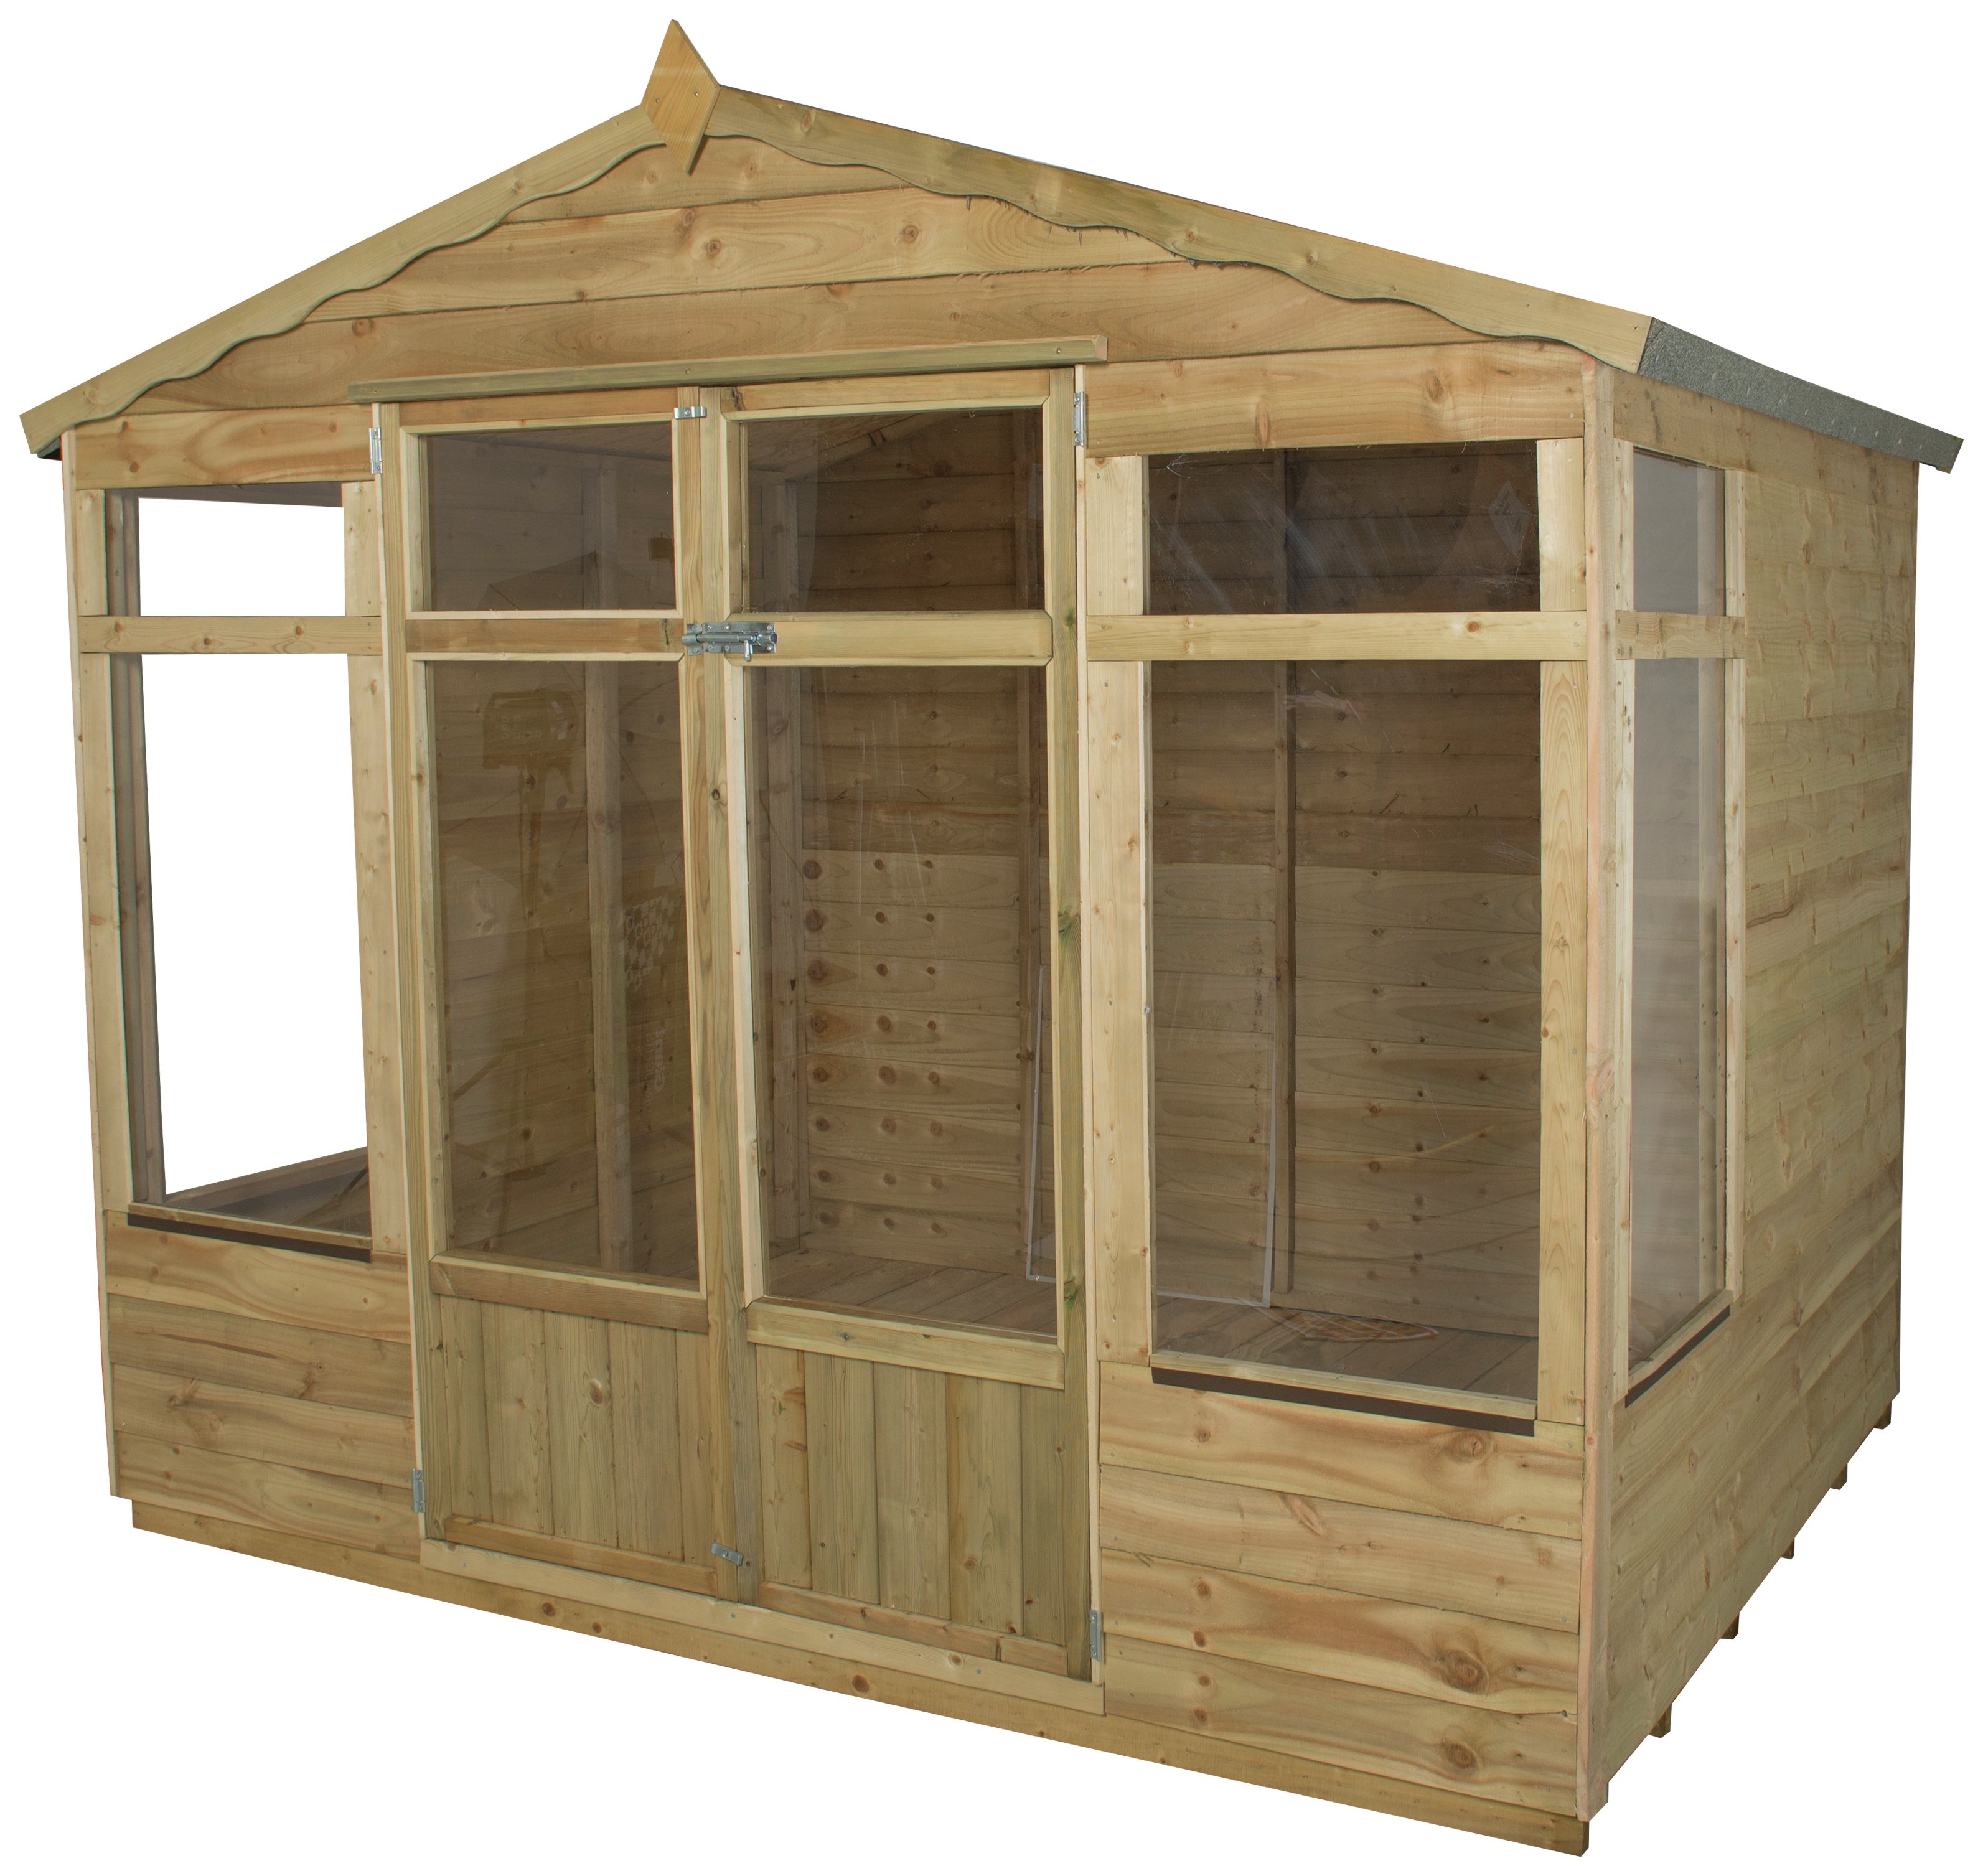 Forest Oakley Summerhouse 8 x 6ft. at Argos review